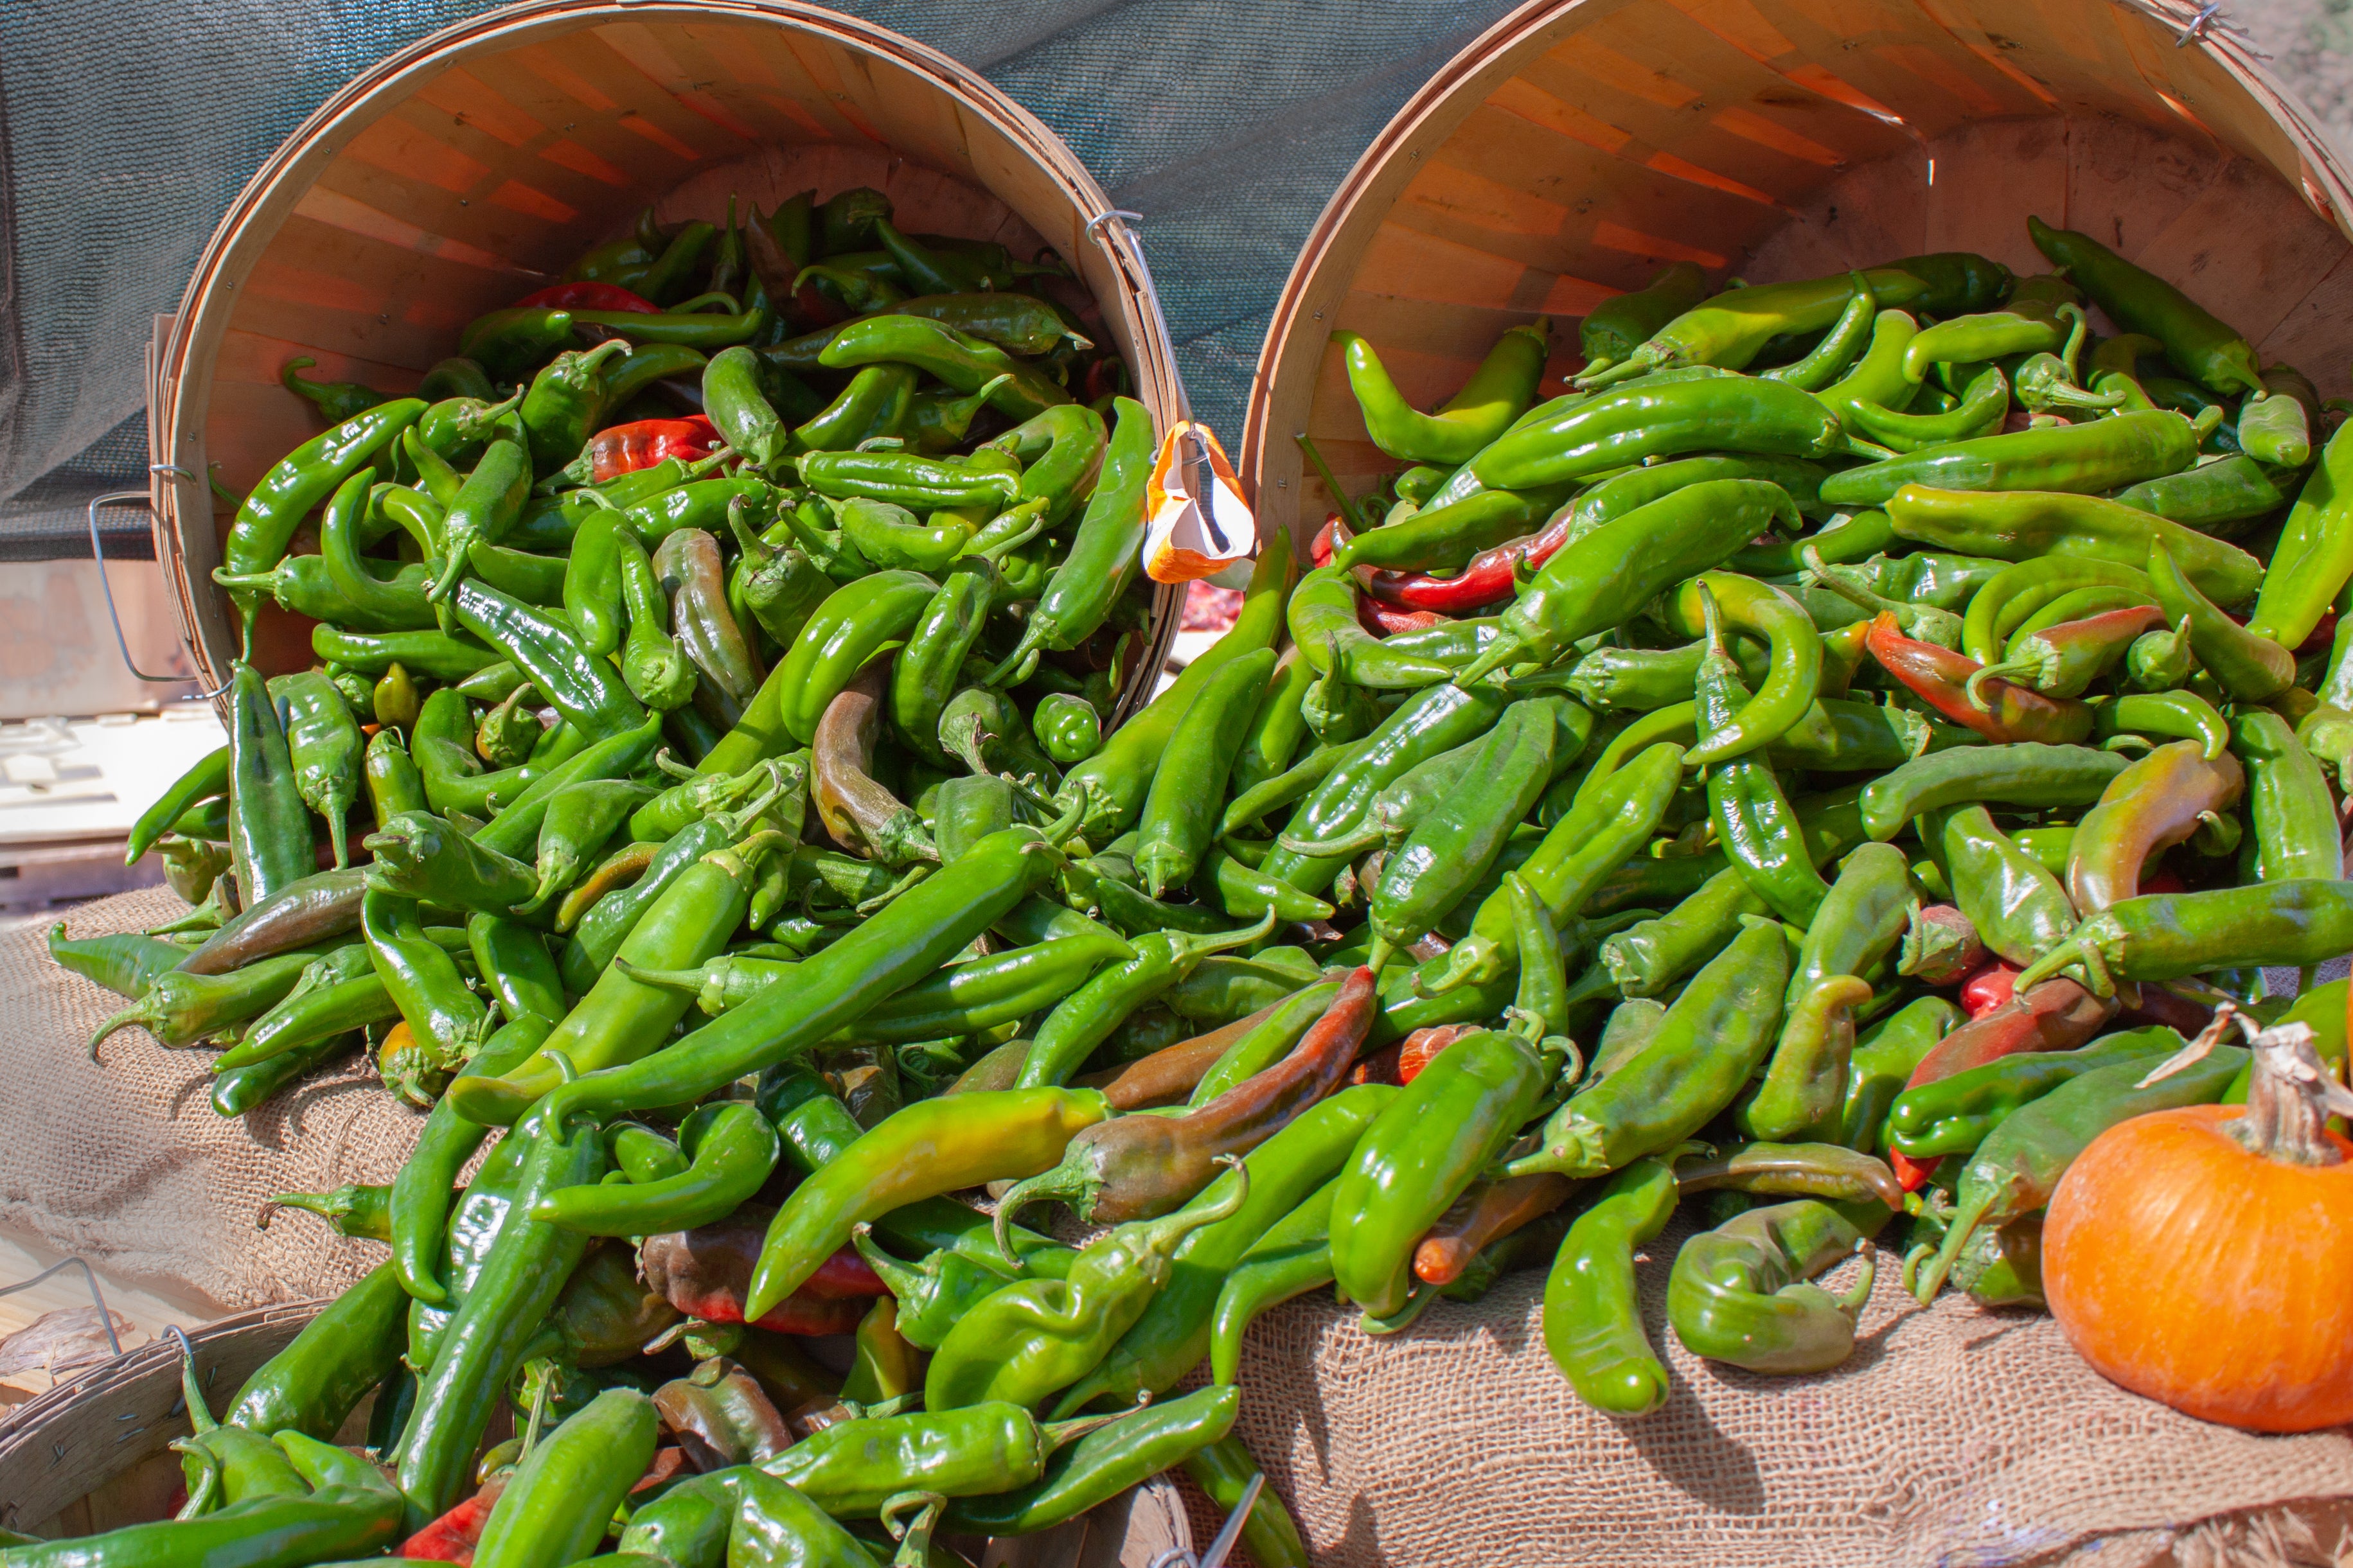 What is special about Hatch chile?